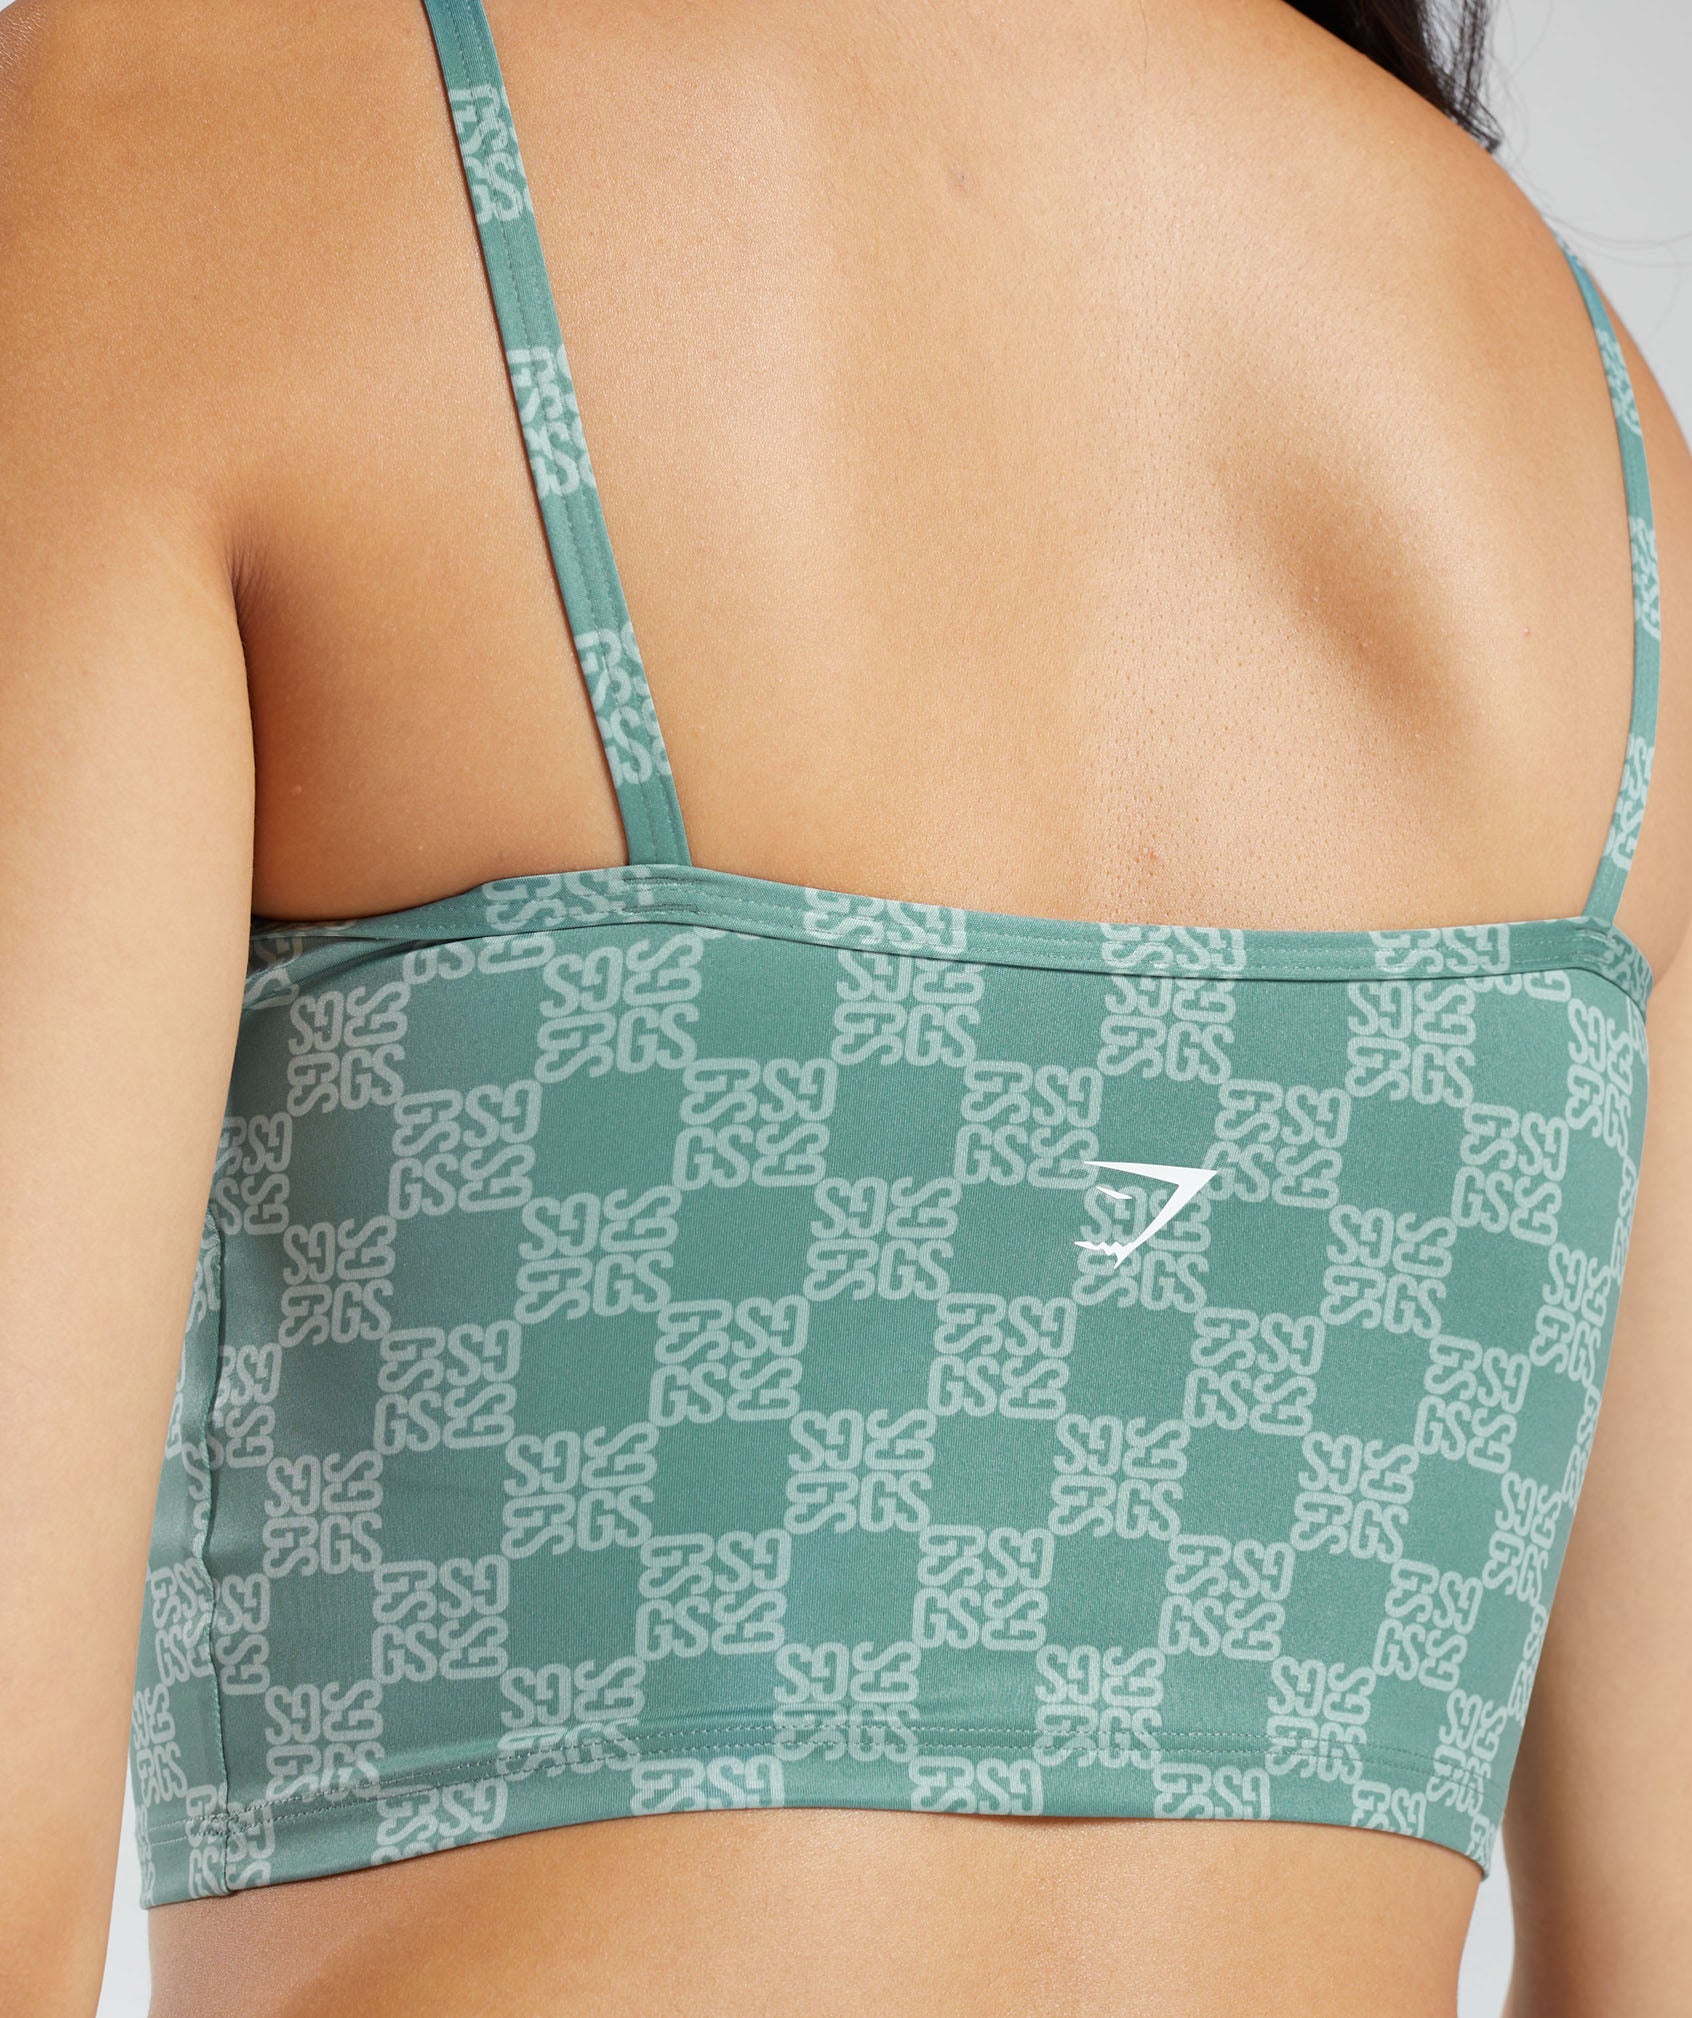 Monogram Crop Cami Tank in Frost Teal - view 4